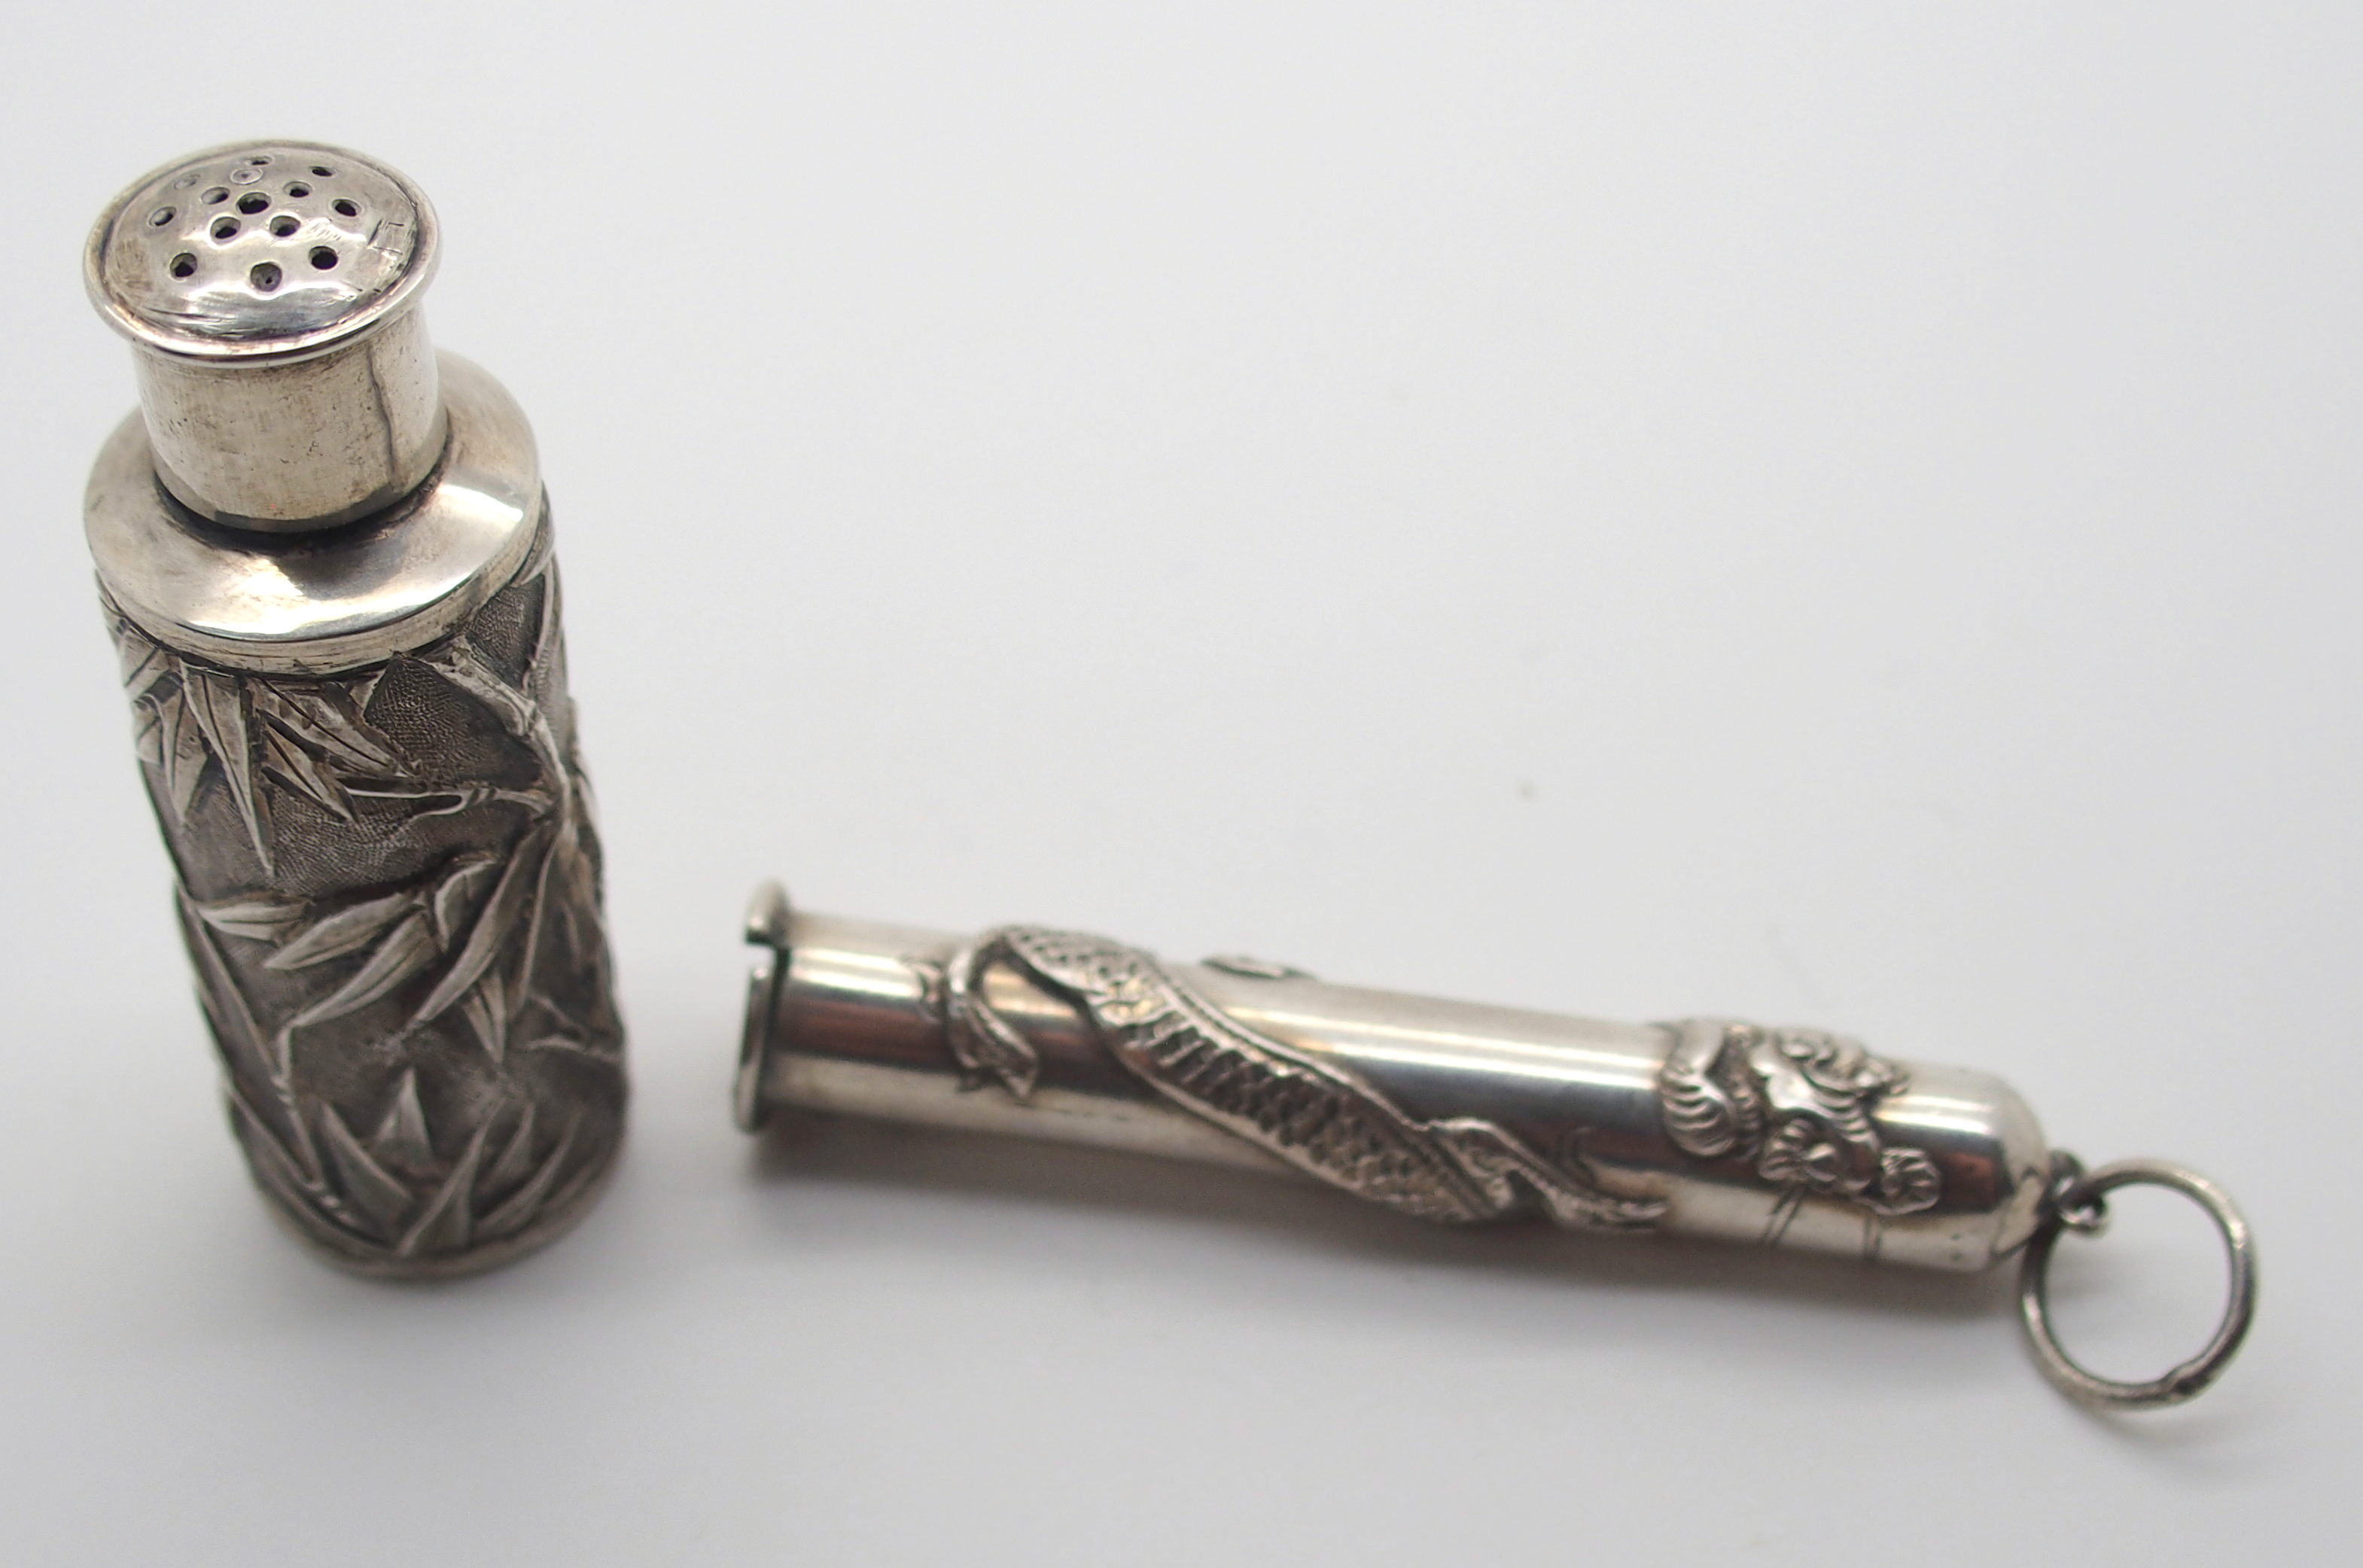 A CHINESE SILVER PEPPER CASTOR decorated with bamboo, stamped WH 90, 5.5cm high, white metal - Image 9 of 10